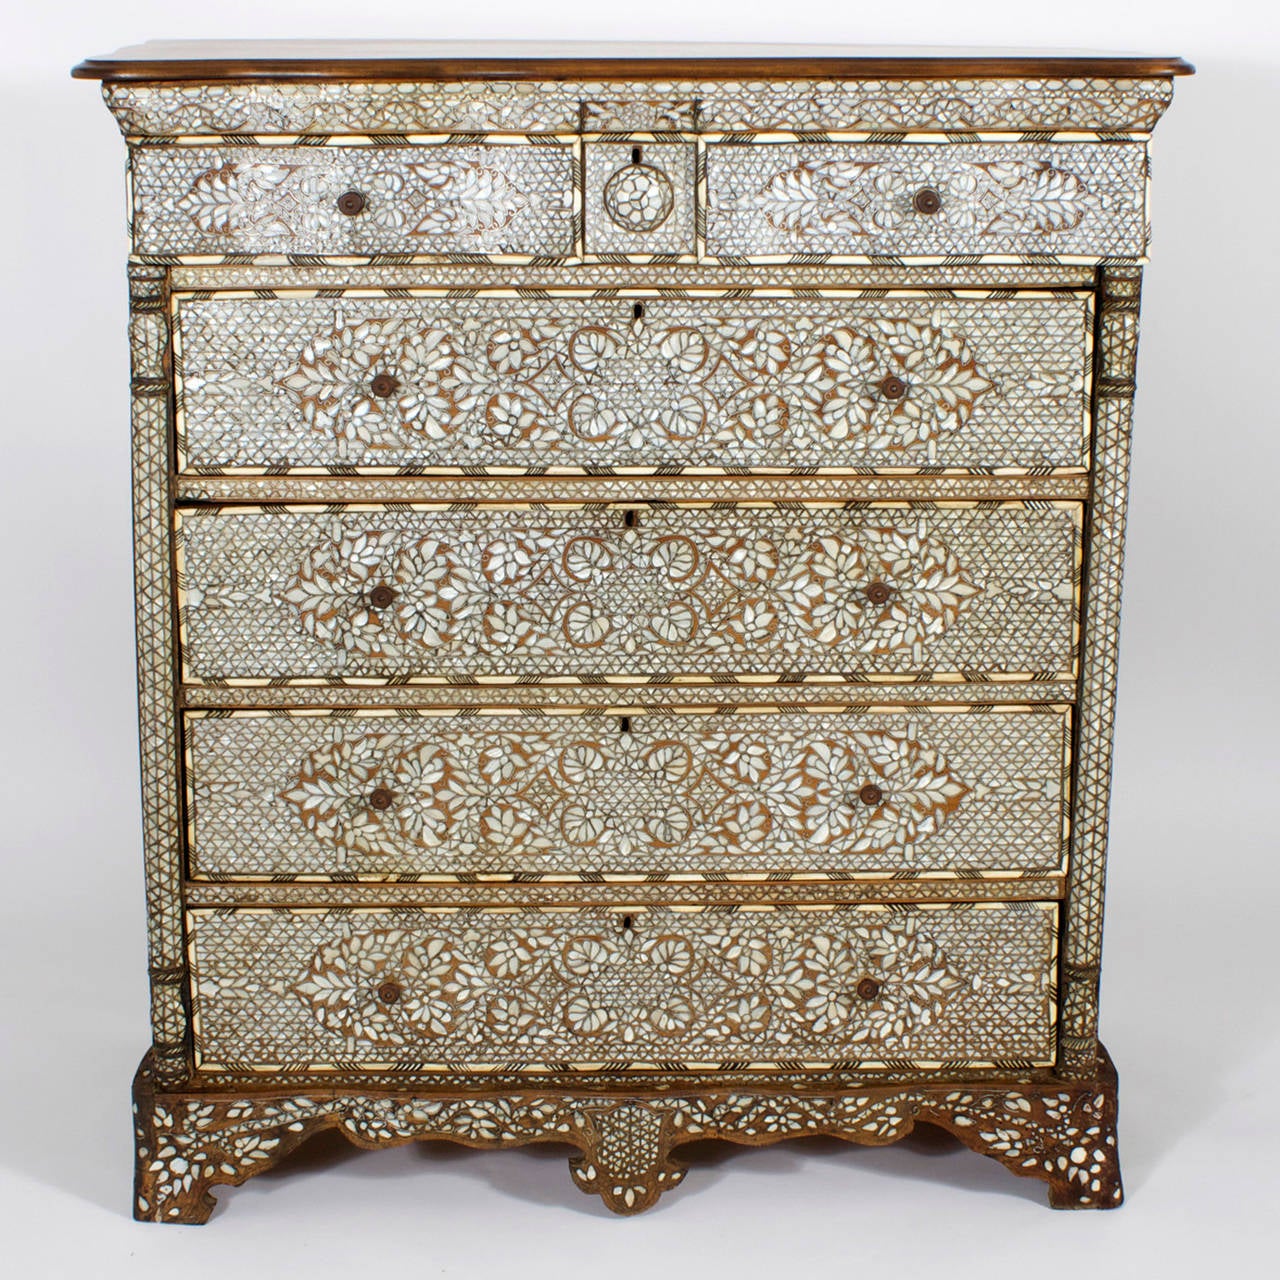 A fine and important antique Syrian gentleman's chest of drawers, made in hardwood and intensely decorated with bone and mother-of-pearl inlaid geometric and floral designs. This incredible seven drawer chest, boasts turned split quarter columns,